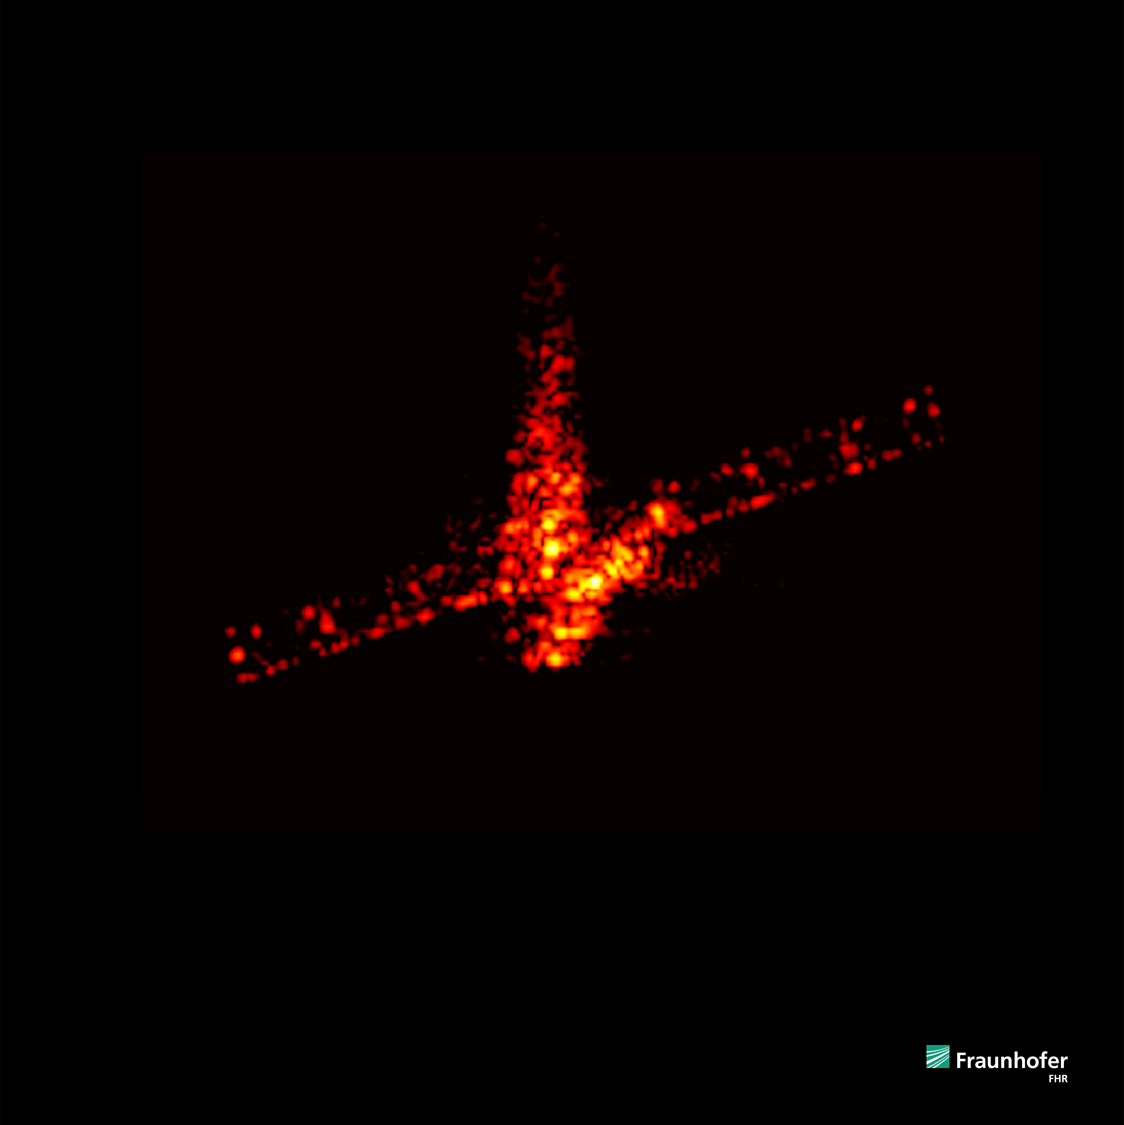 Final images of Aeolus during its brief phase as space debris acquired by the Space Observation Radar TIRA of Fraunhofer FHR. (Note the color represents the radar echo intensity.)